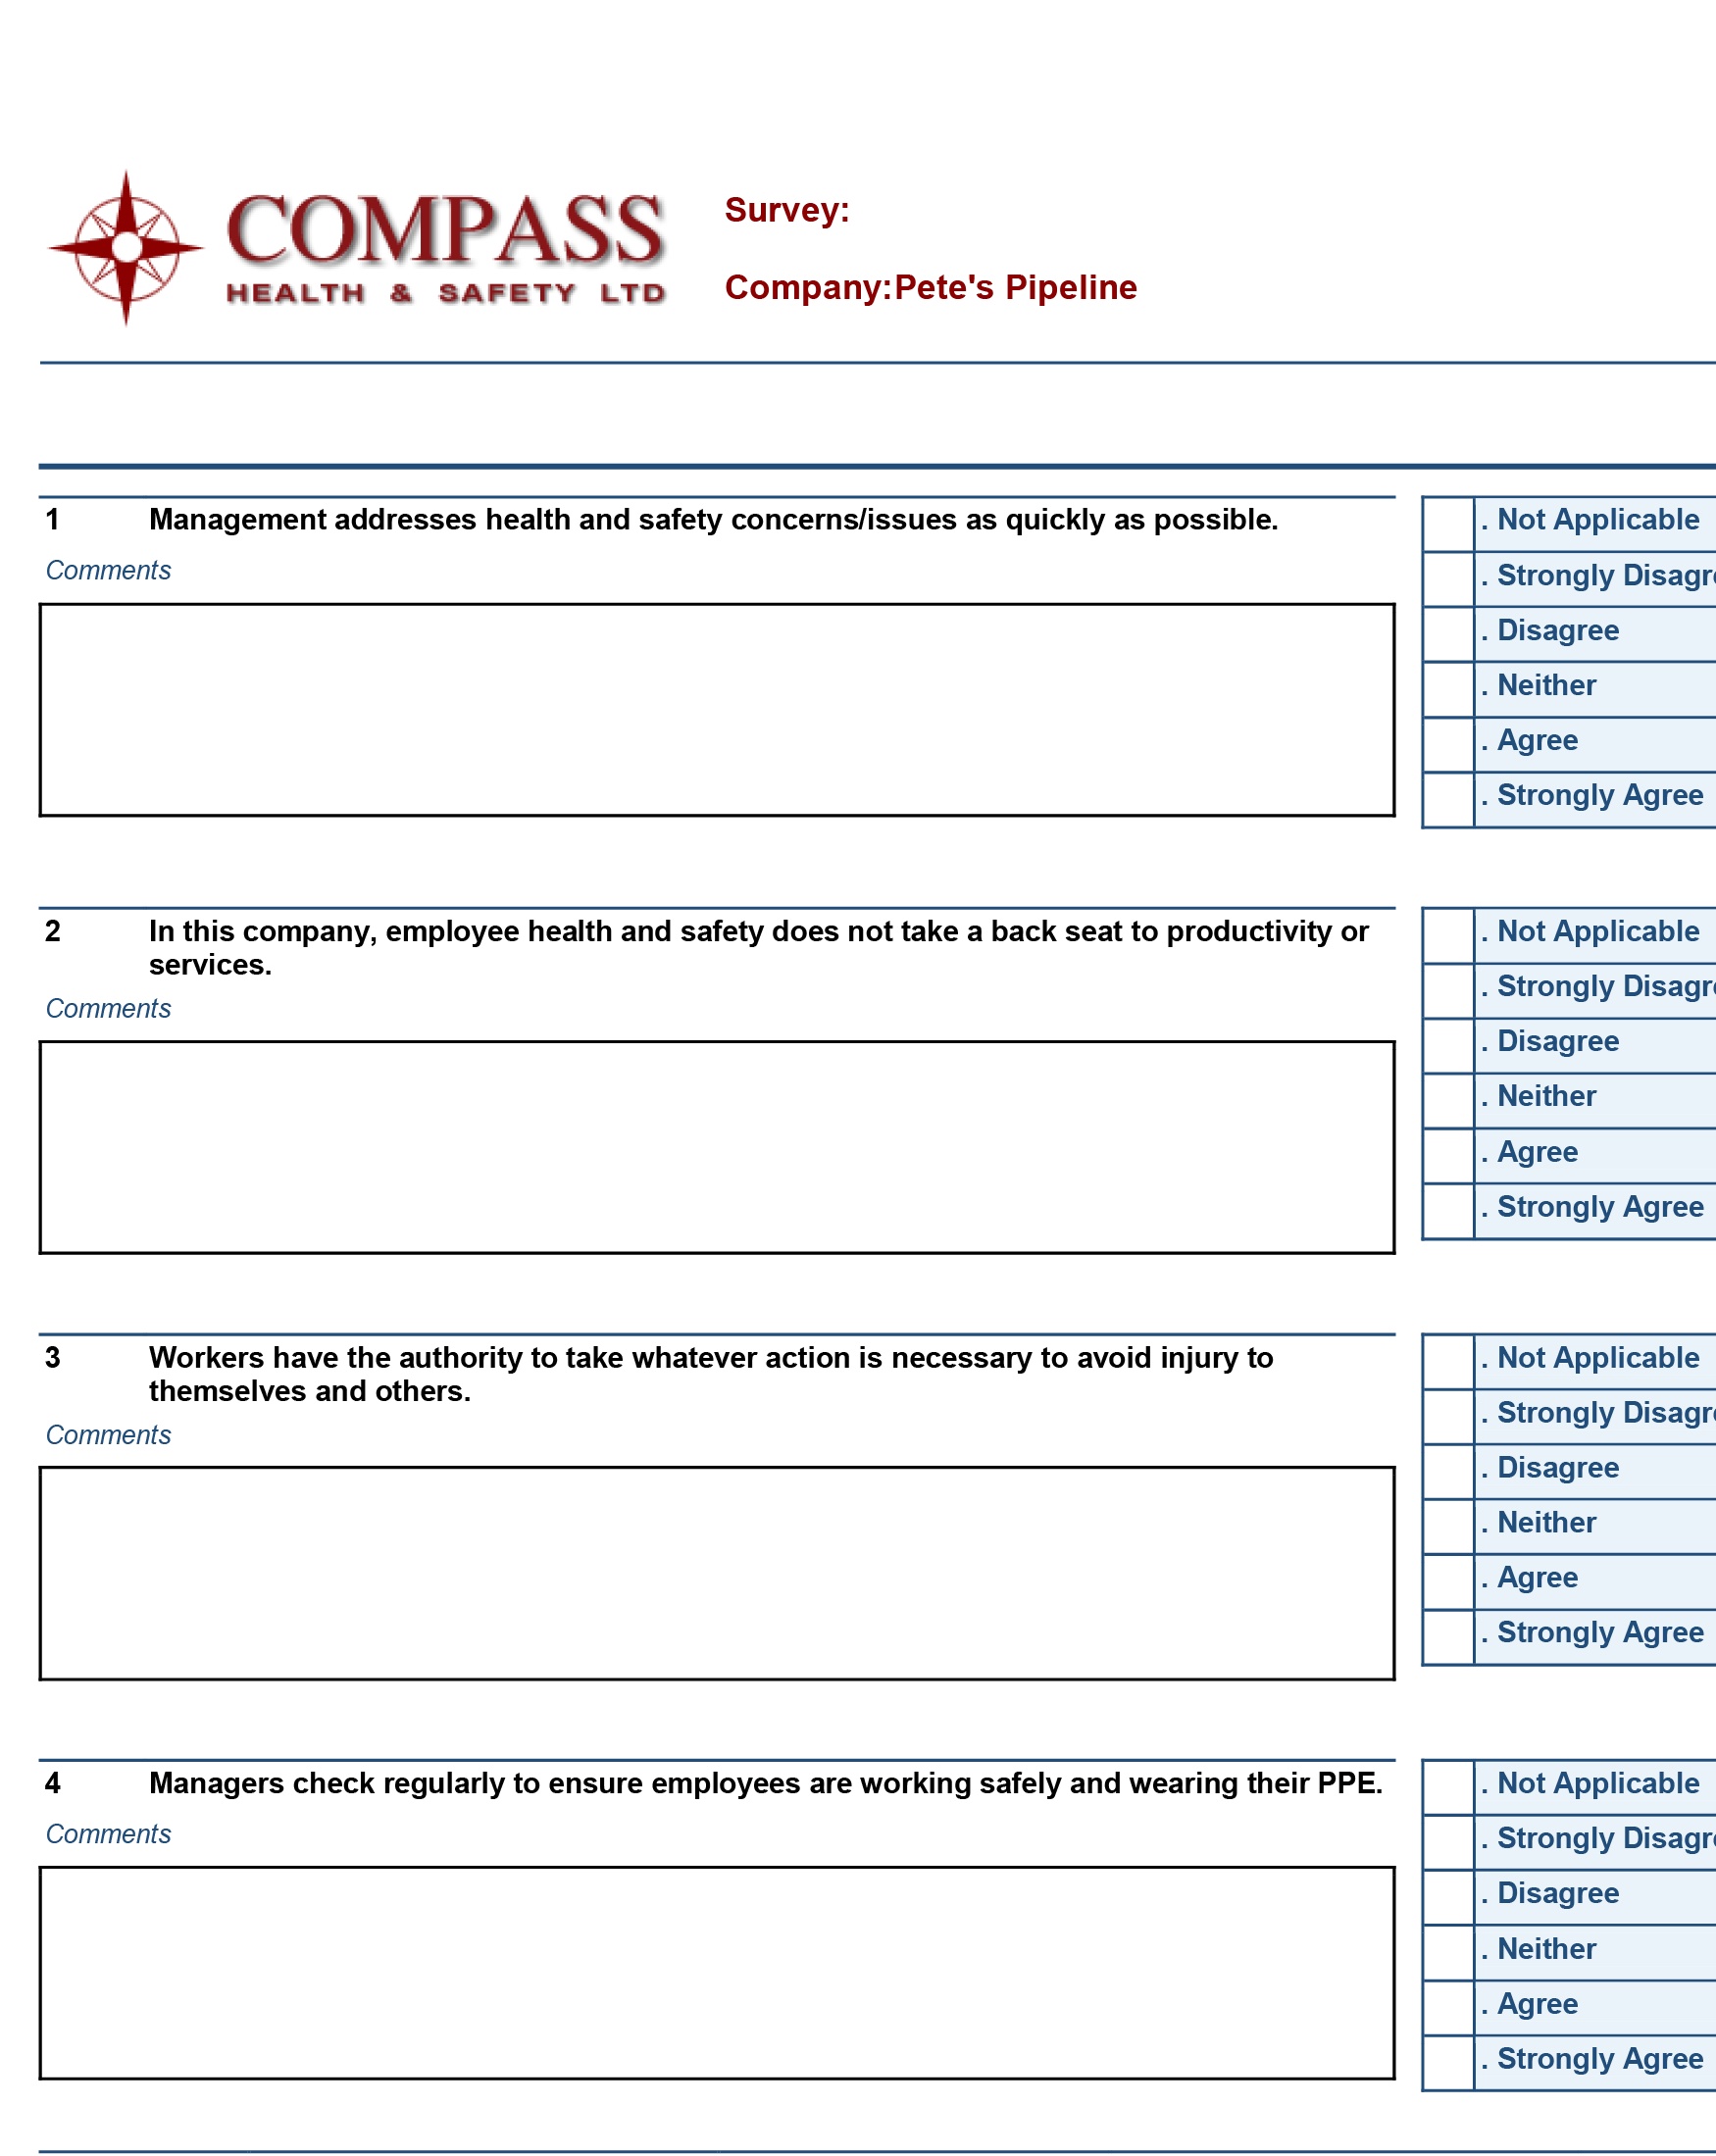 Compass Safety Perception Survey example